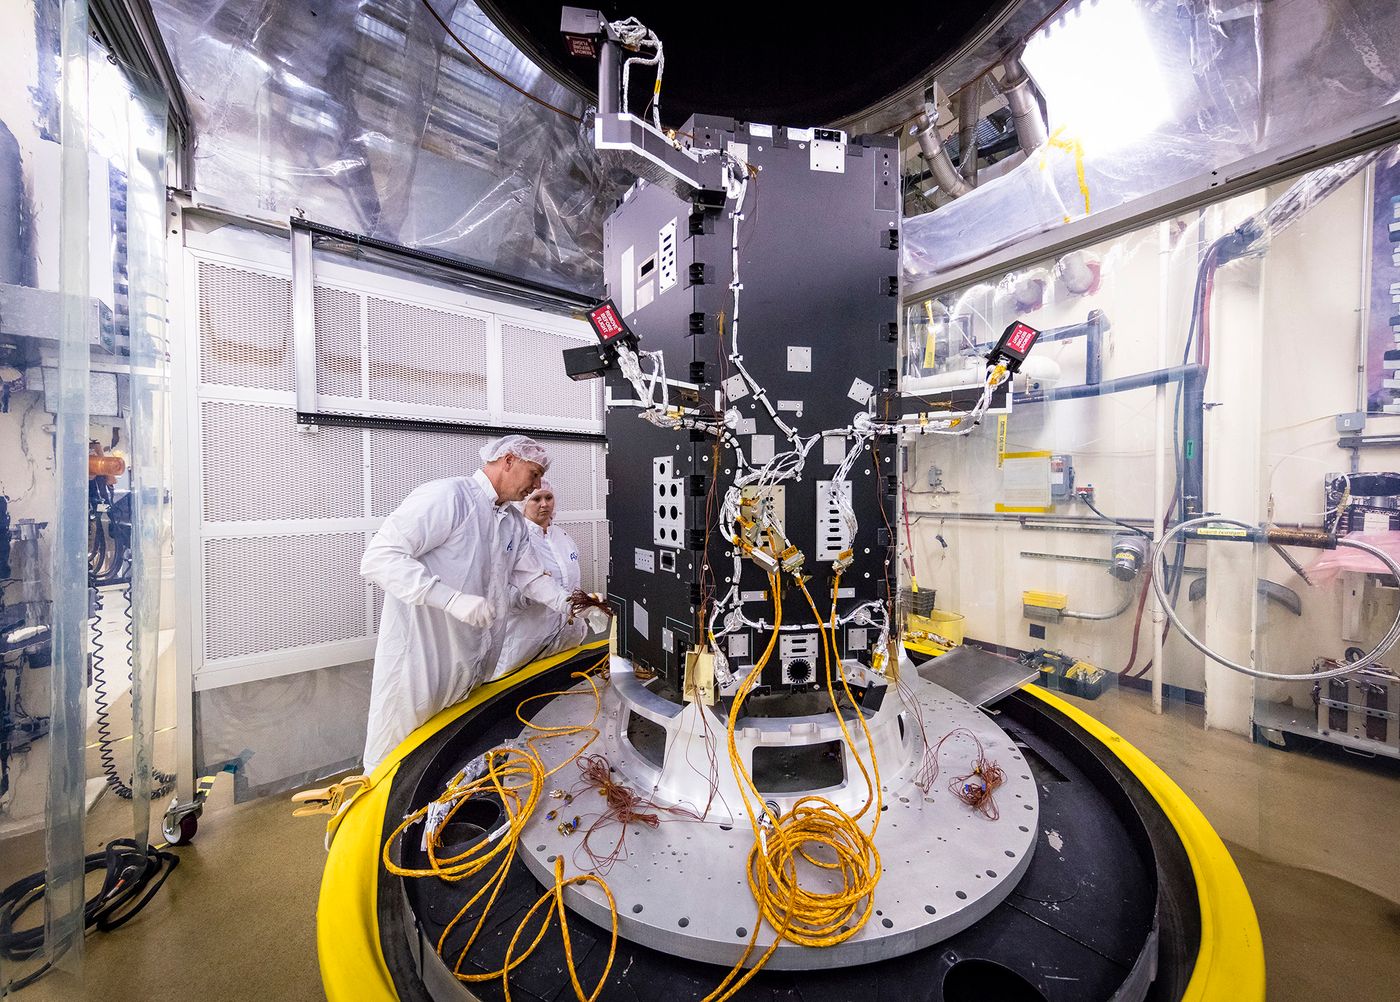 Engineers at Johns Hopkins University oversee the assembly of the new spacecraft.